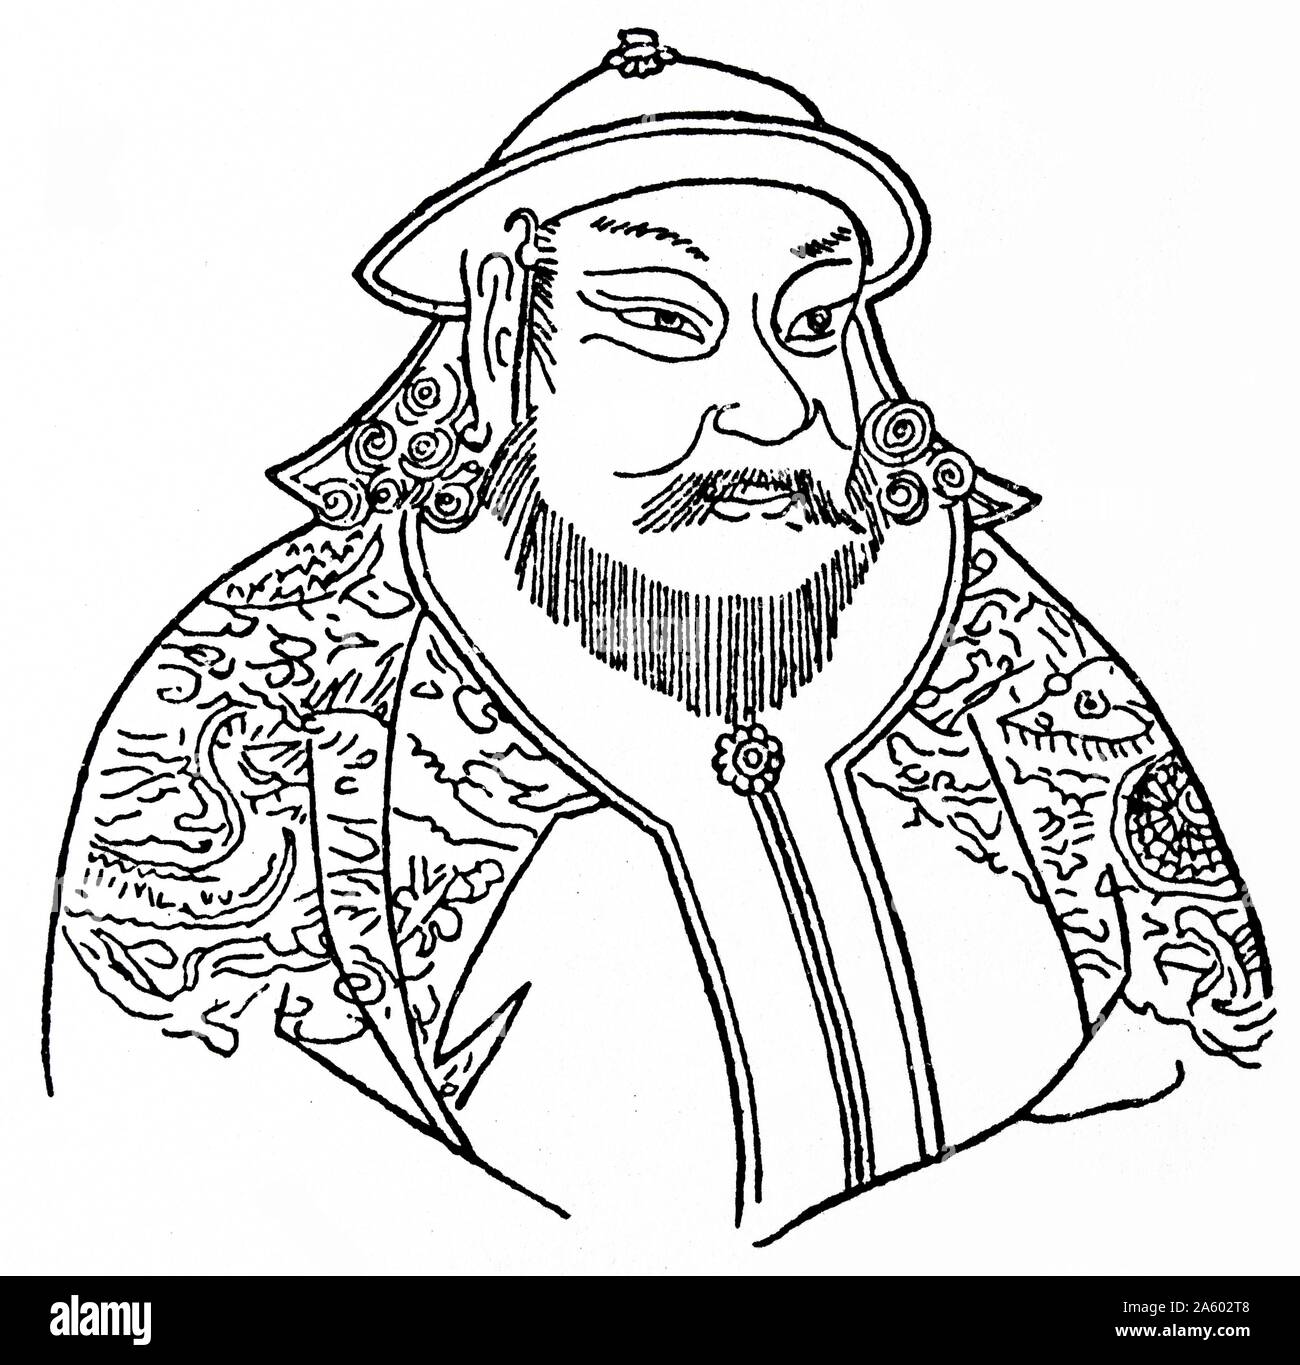 Kubiai KHAN 1214-1294. Grandson of Ghengis Khan. Fro 1260 Greah Khan of the Mongols, and from 1271 emperor of China. Stock Photo